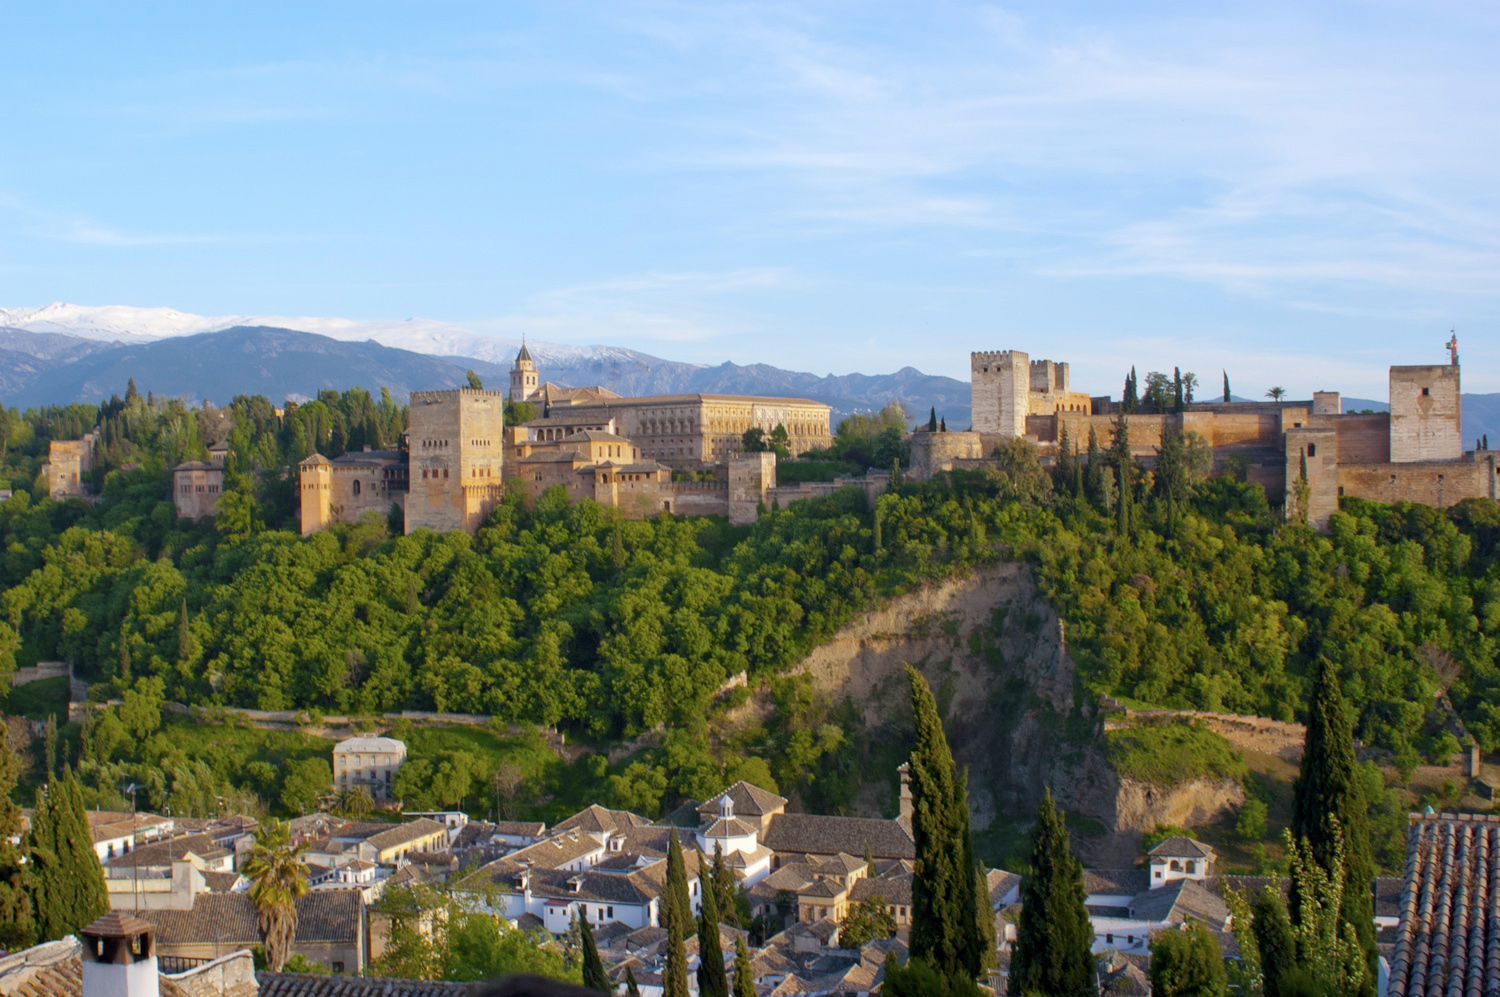 Alhambra tickets - buy tickets for visiting Alhambra, Spain 